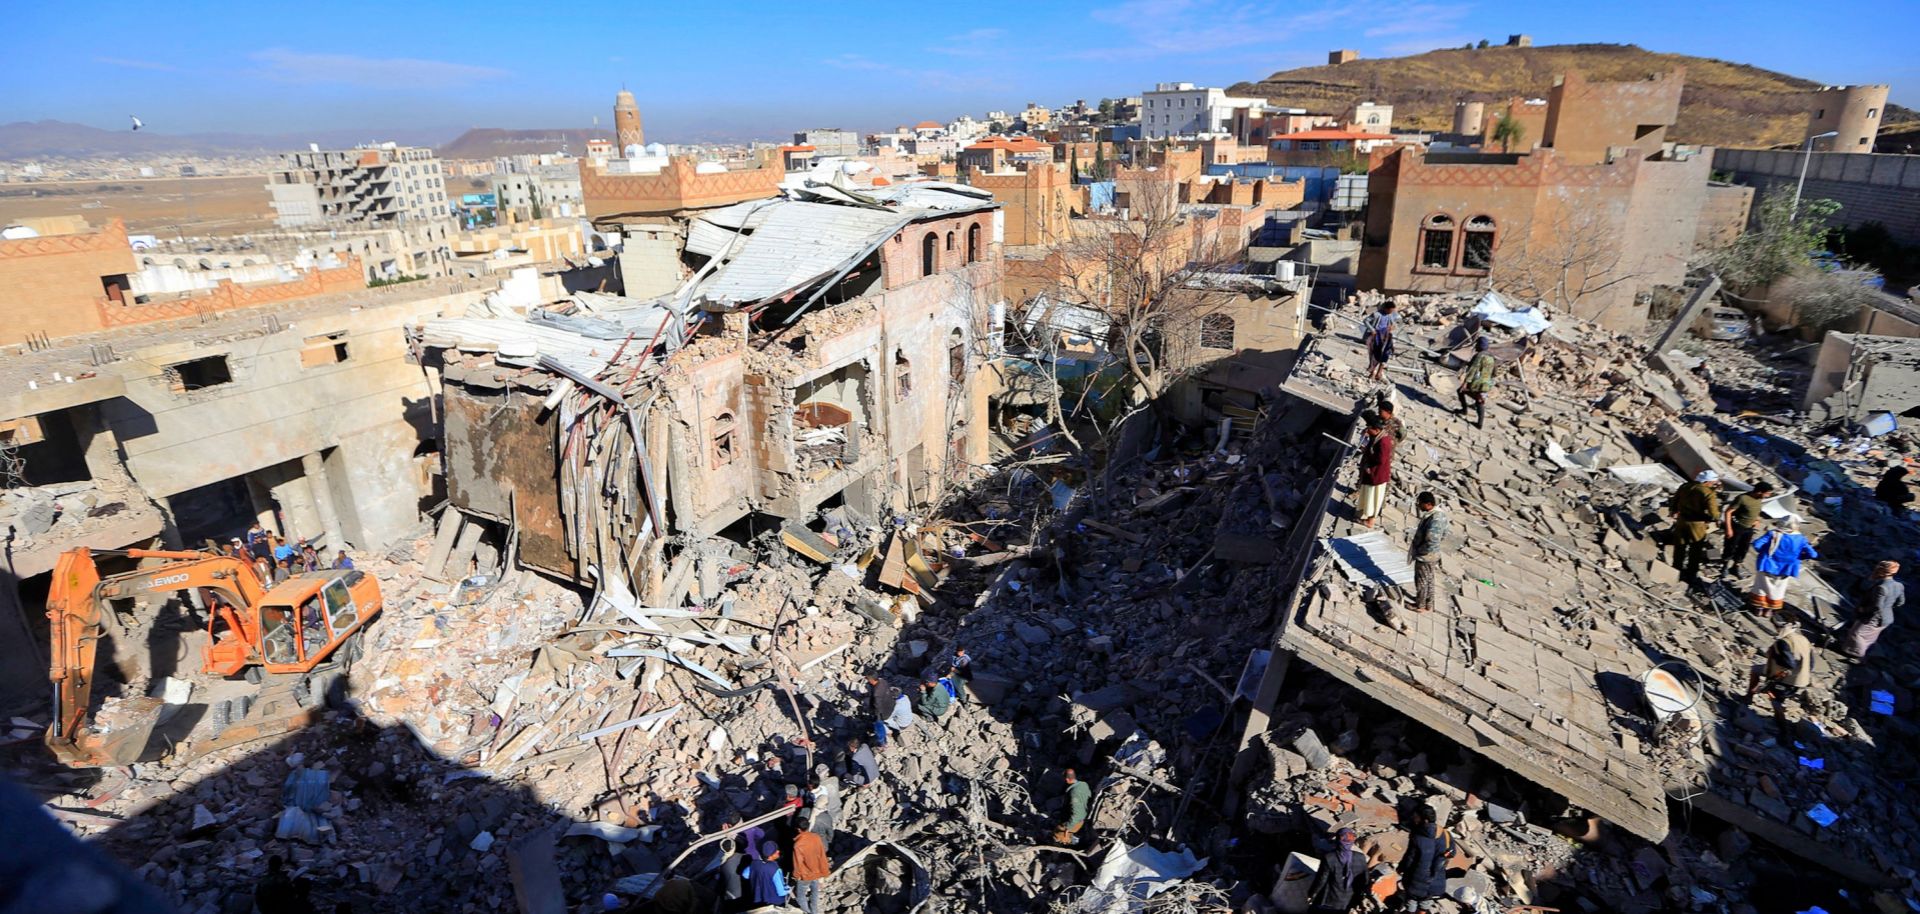 Damaged buildings in the rebel-held capital of Sanaa are seen on Jan. 18, 2022, after the Saudi-led coalition in Yemen launched airstrikes in retaliation for a deadly Houthi attack on Abu Dhabi. 